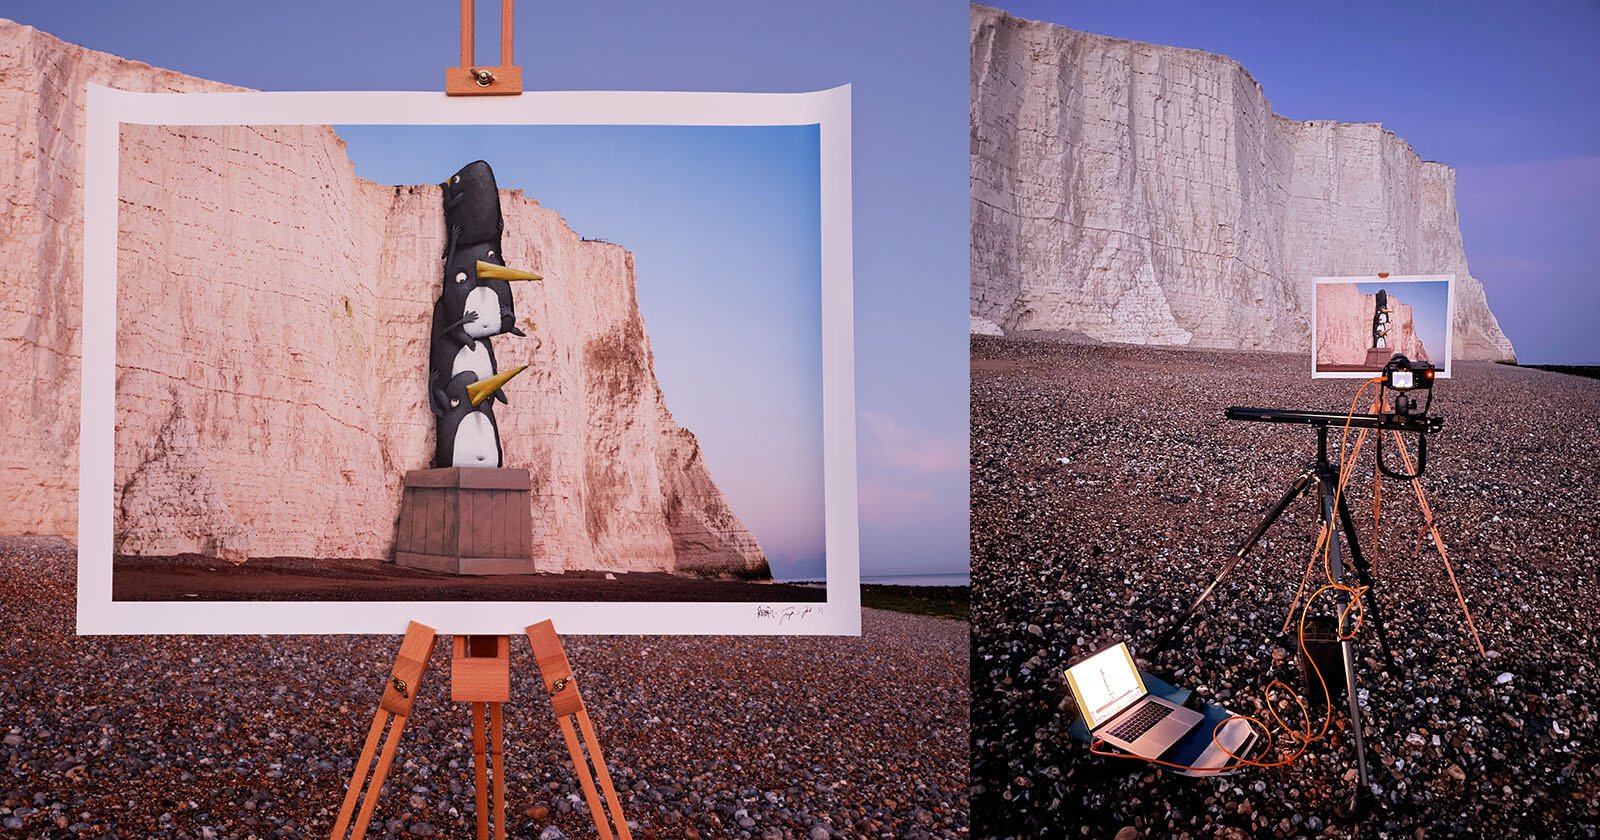 Photographers Cleverly Brings Street Art to Impossible Places